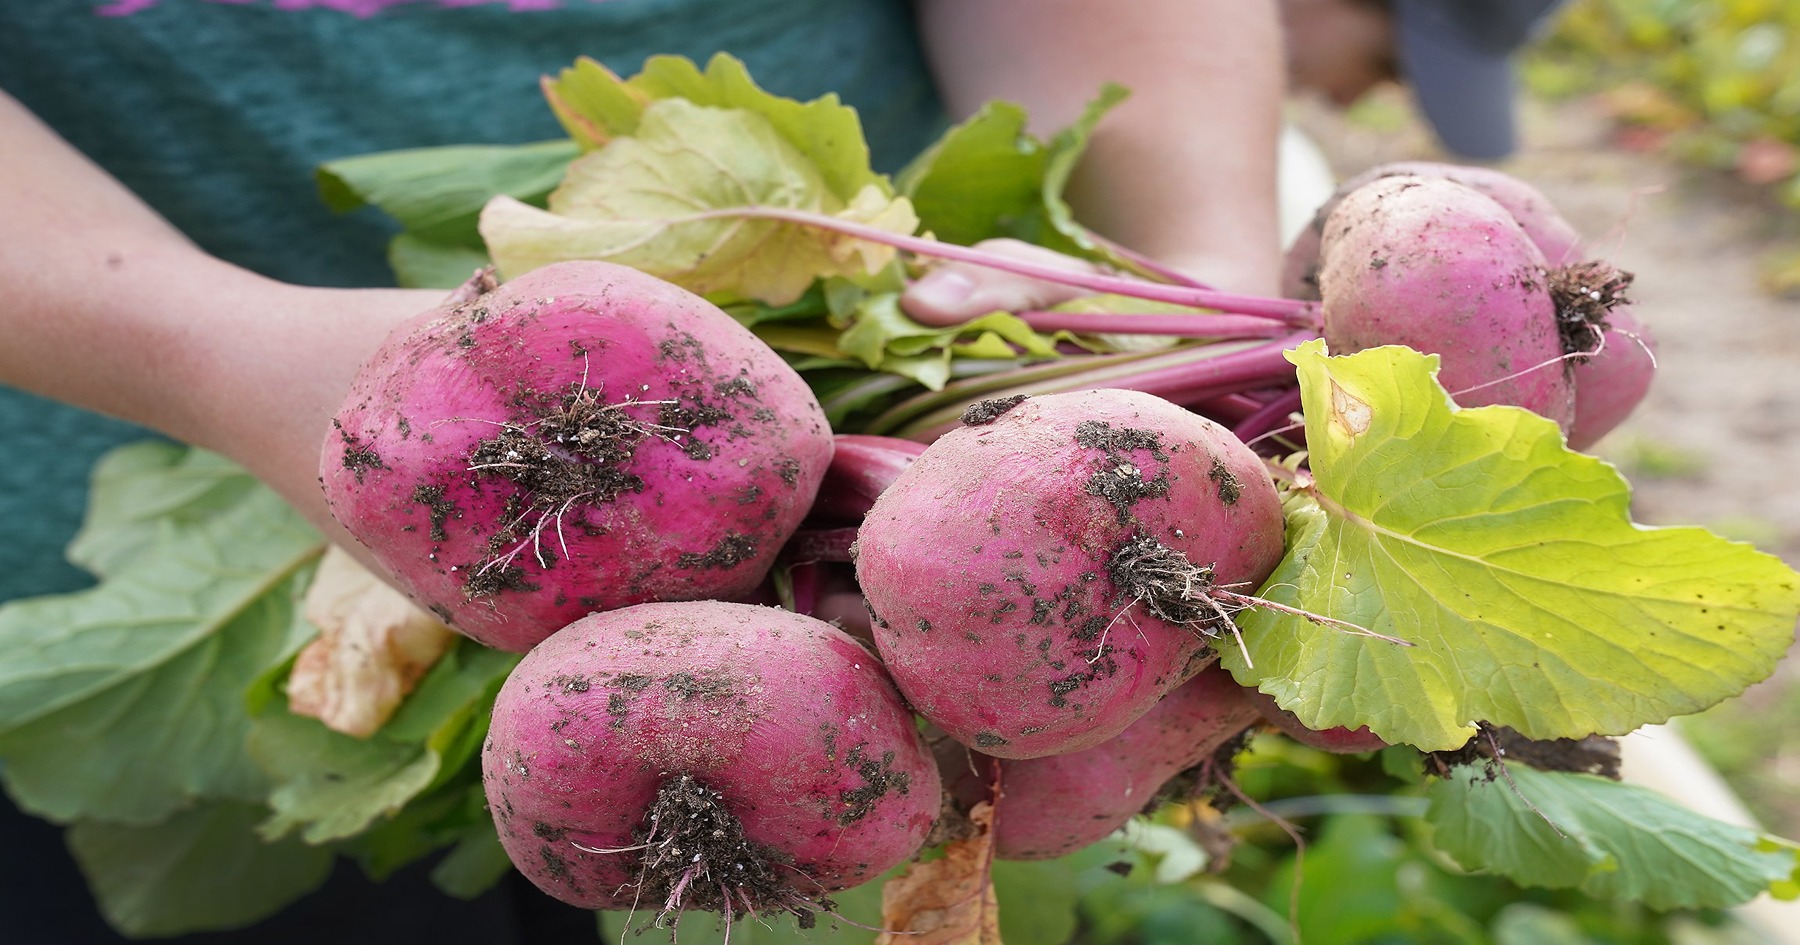 Beets from student farm